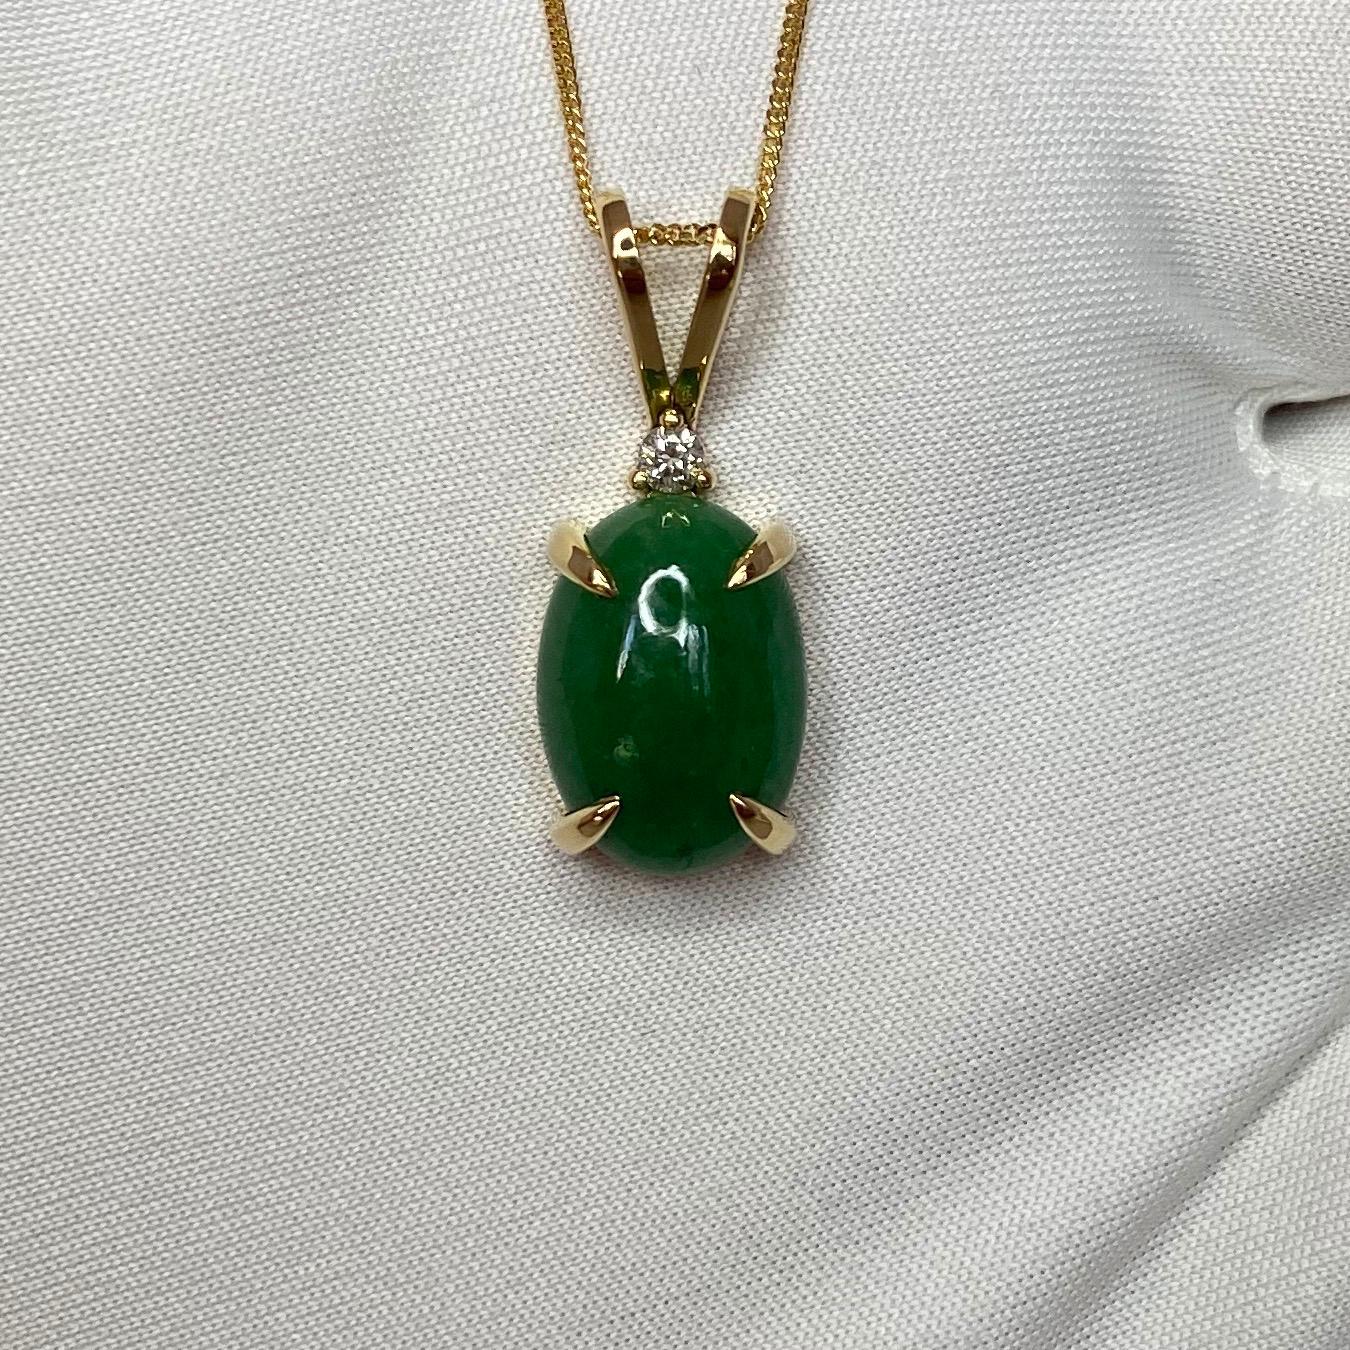 Bright Green Jade & Diamond 18k Yellow Gold Pendant Necklace.

GIA Certified 6.09ct untreated A grade jadeite with a bright green colour and excellent oval cabochon cut. It's very difficult to photograph cabochons due to how the dome reflects light,